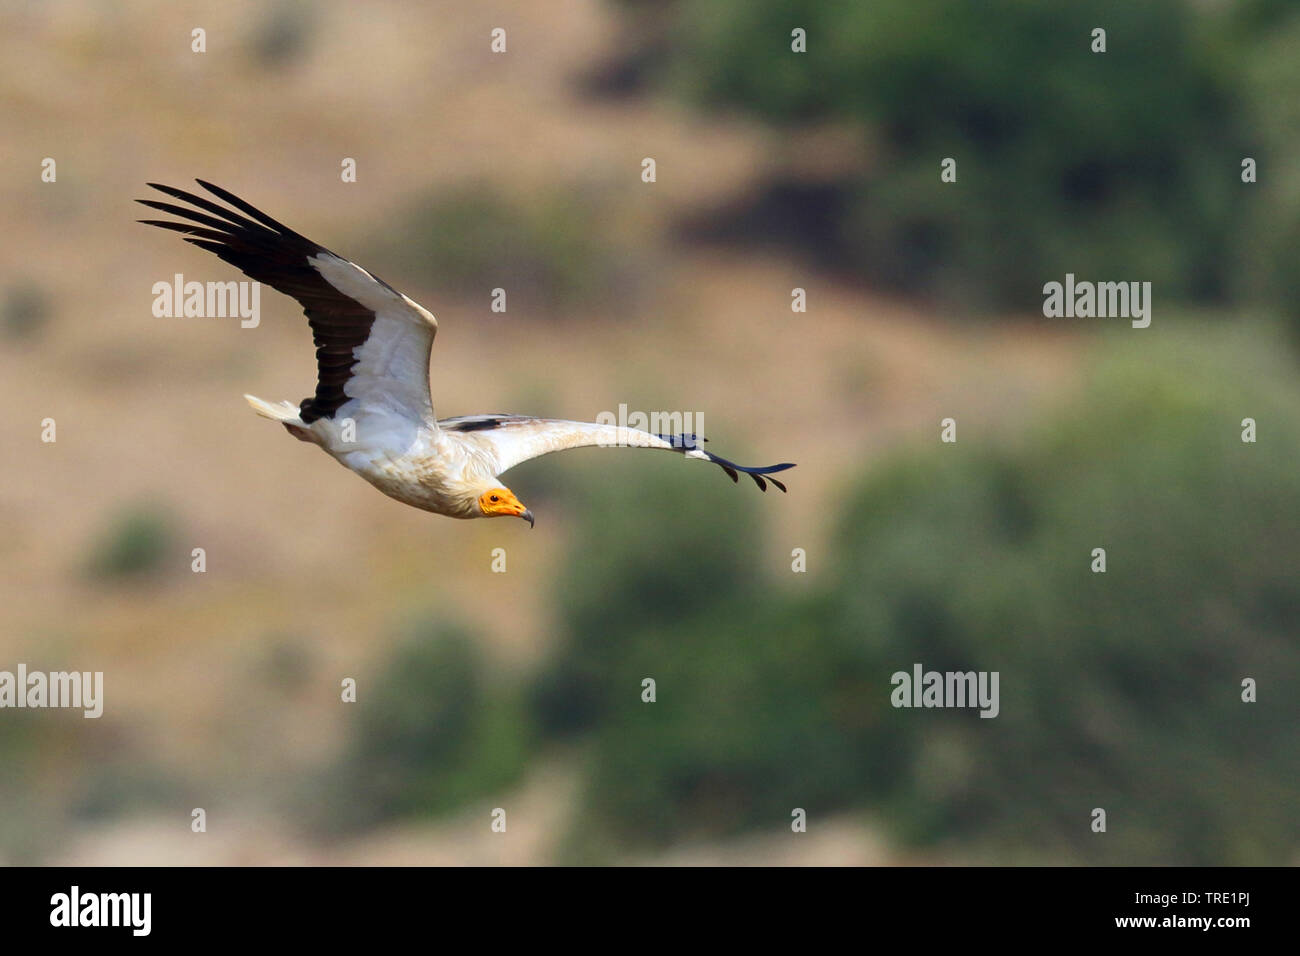 Egyptian vulture (Neophron percnopterus), flying, Spain, Andalusia Stock Photo